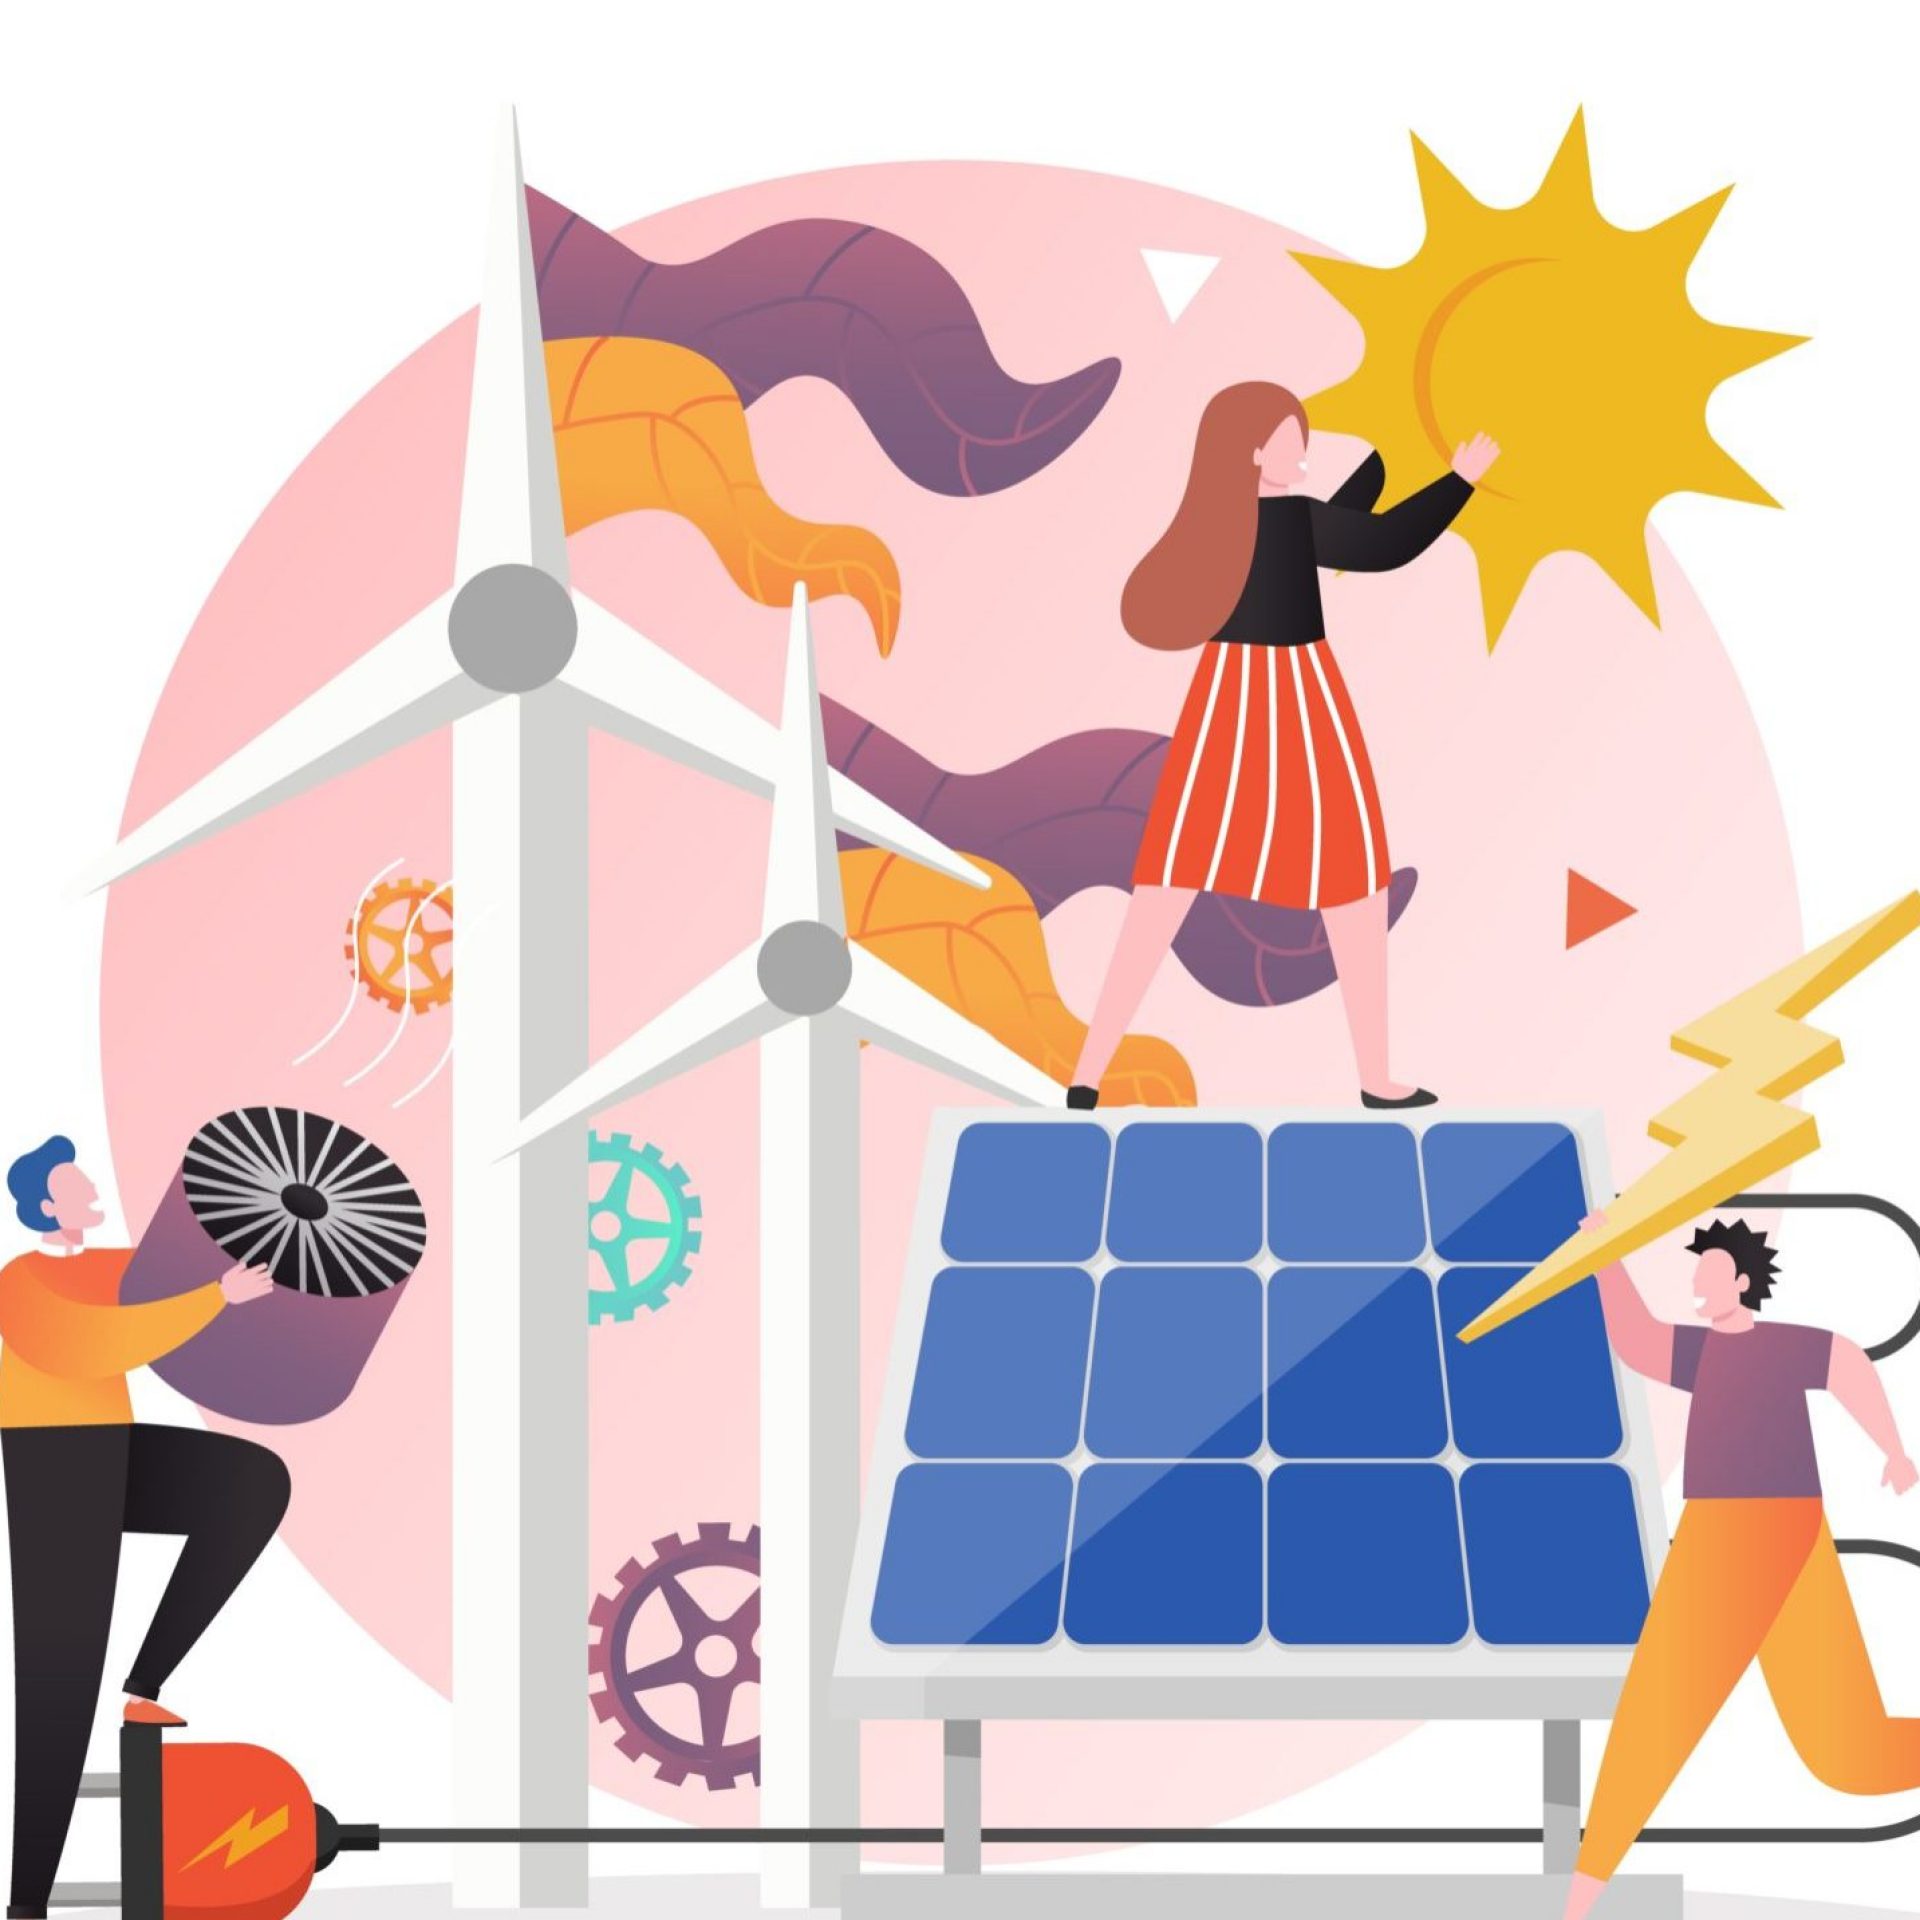 Alternative clean energy production, vector illustration. Solar panels and wind turbines generating electricity from renewable sources such as sun and wind, male and female characters.